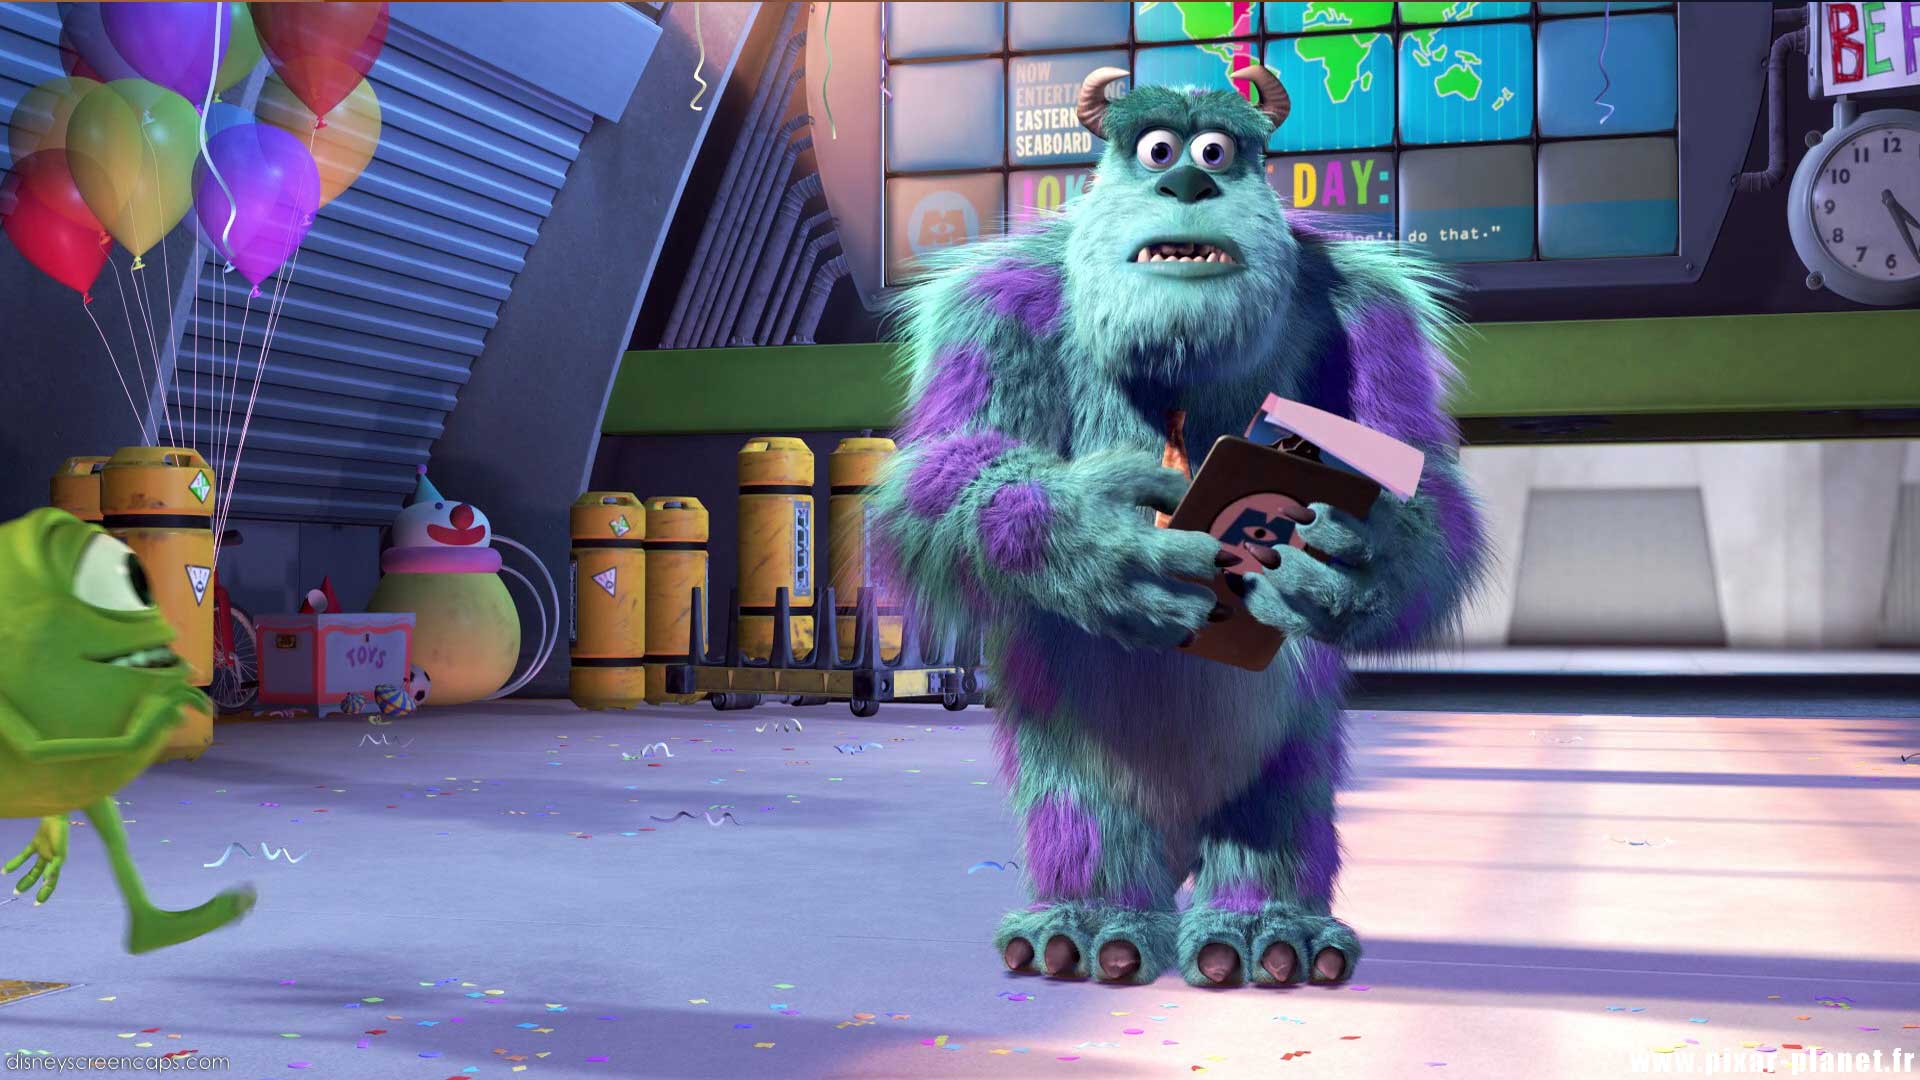 Monsters inc background and monsters university wallpaper hd